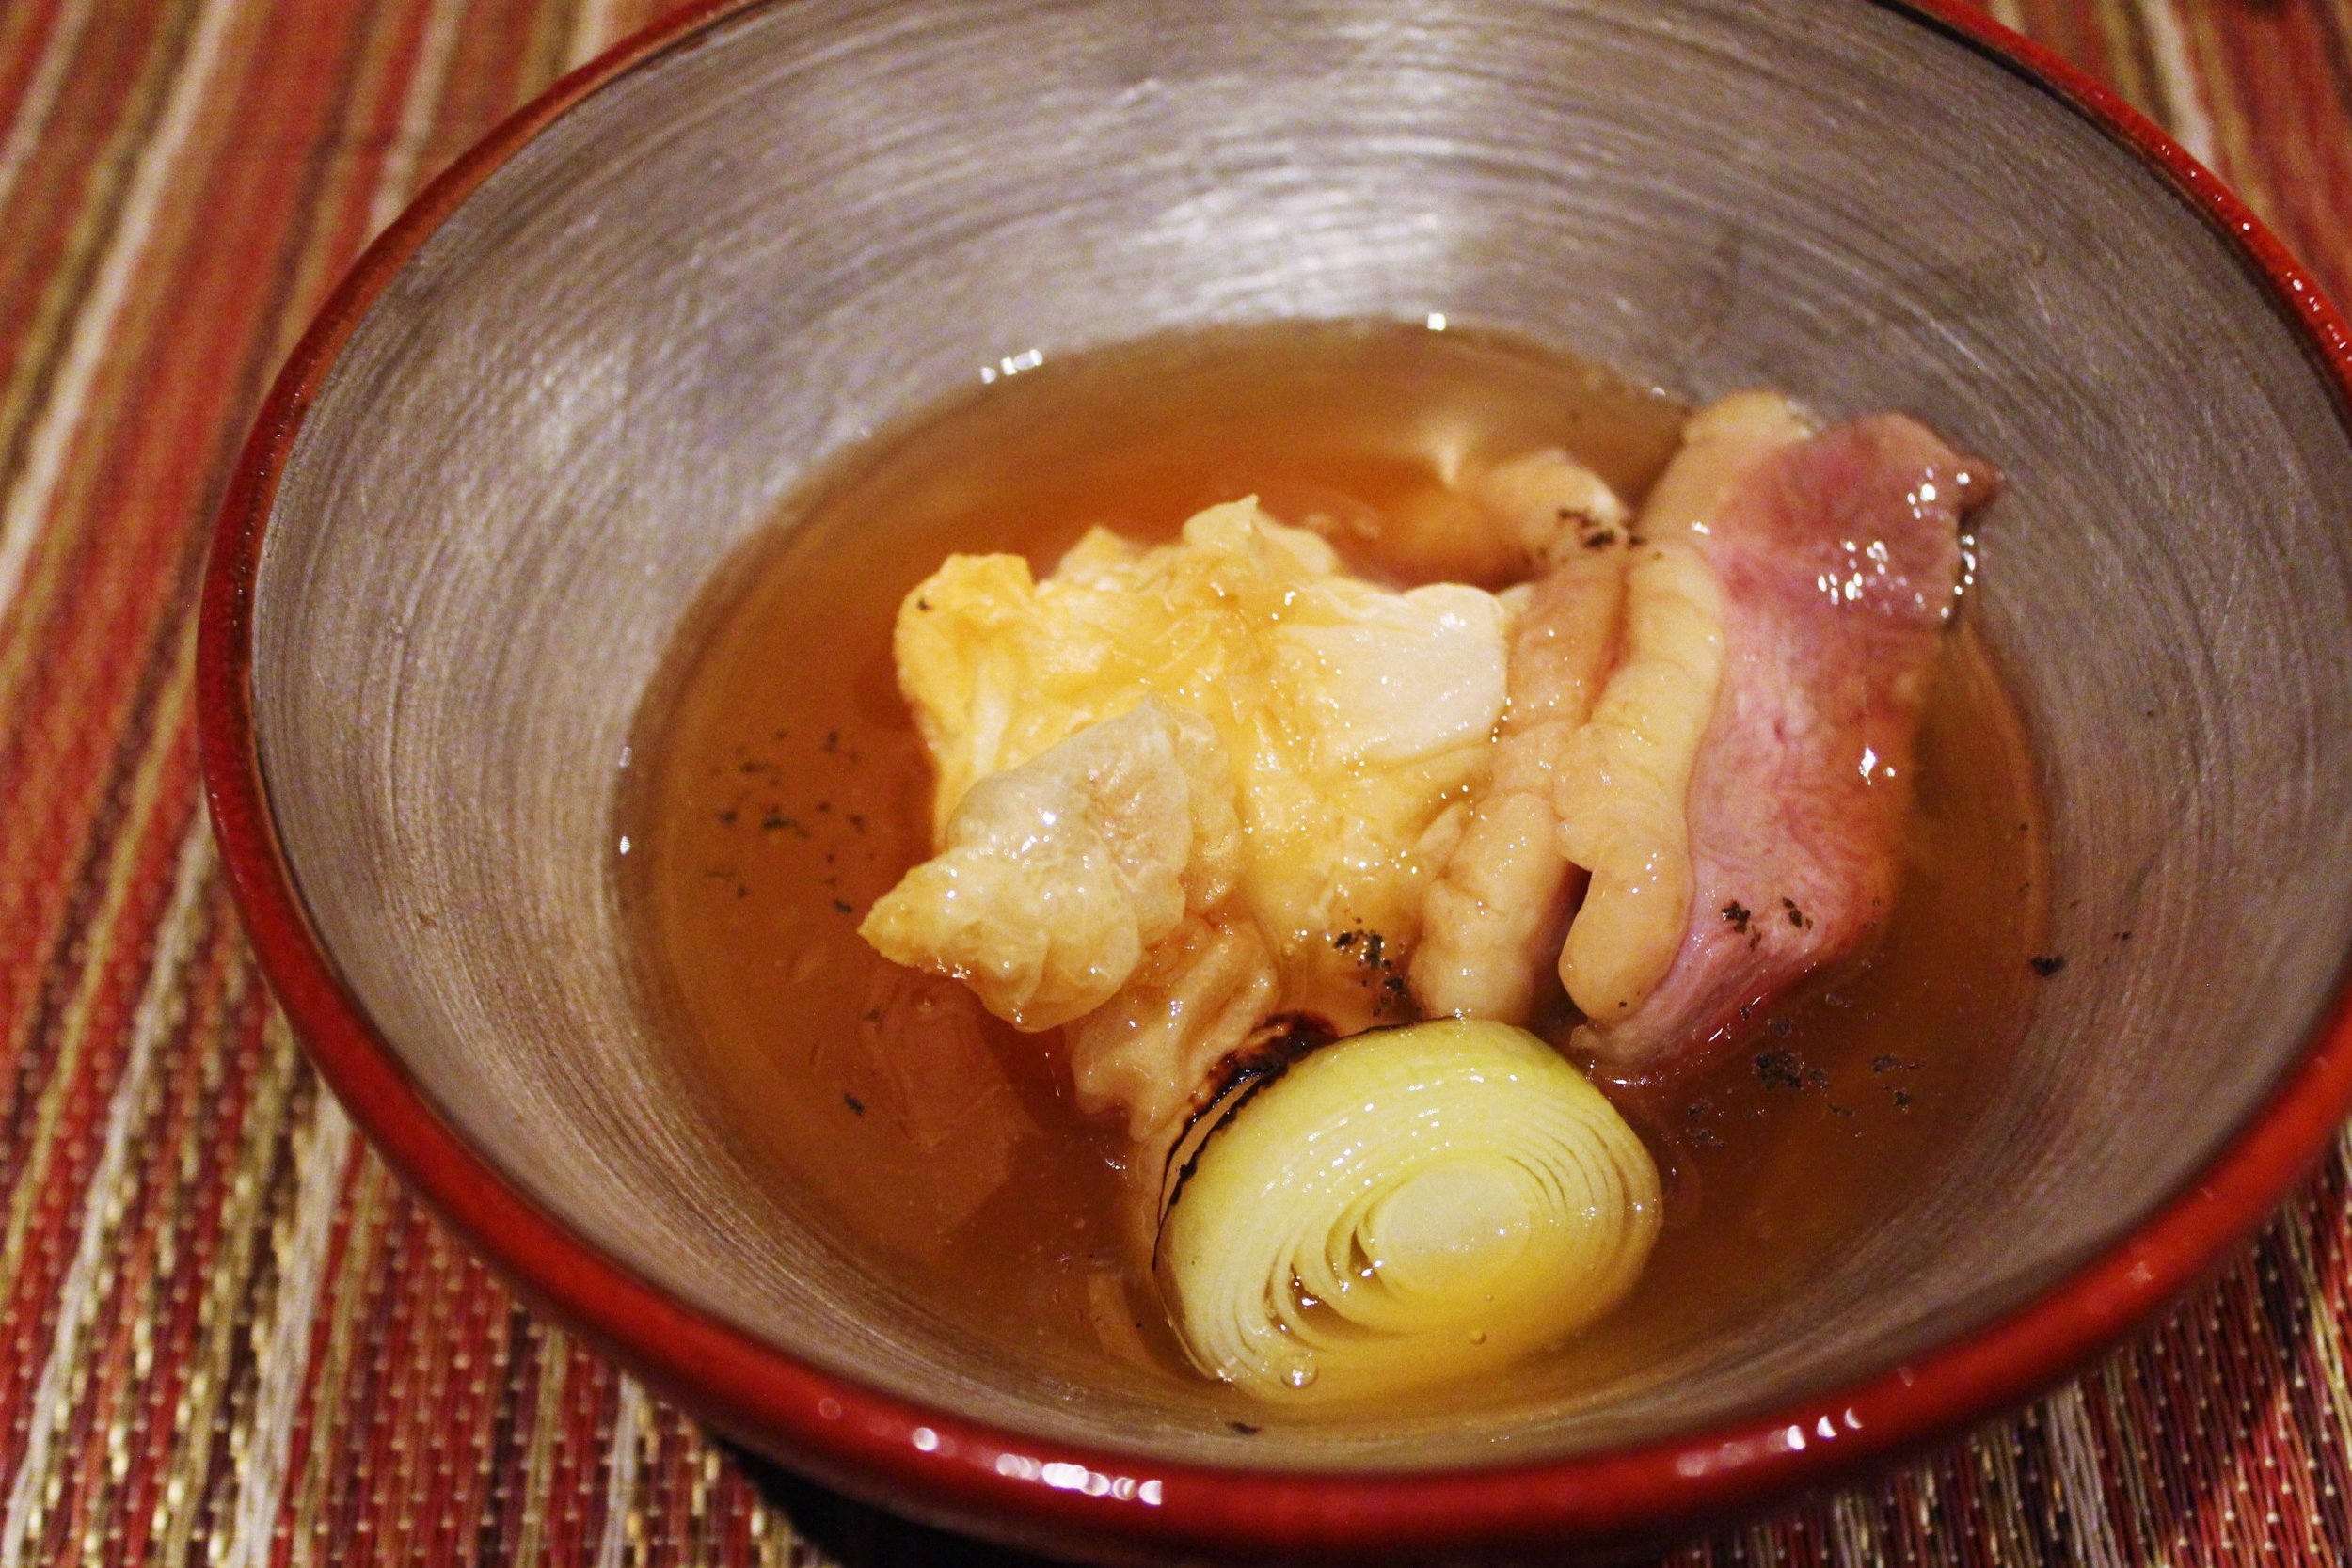 "Nimono" Seventh Course: Potato Cream Pie and Braised Duck Grilled Leek in Duck Broth